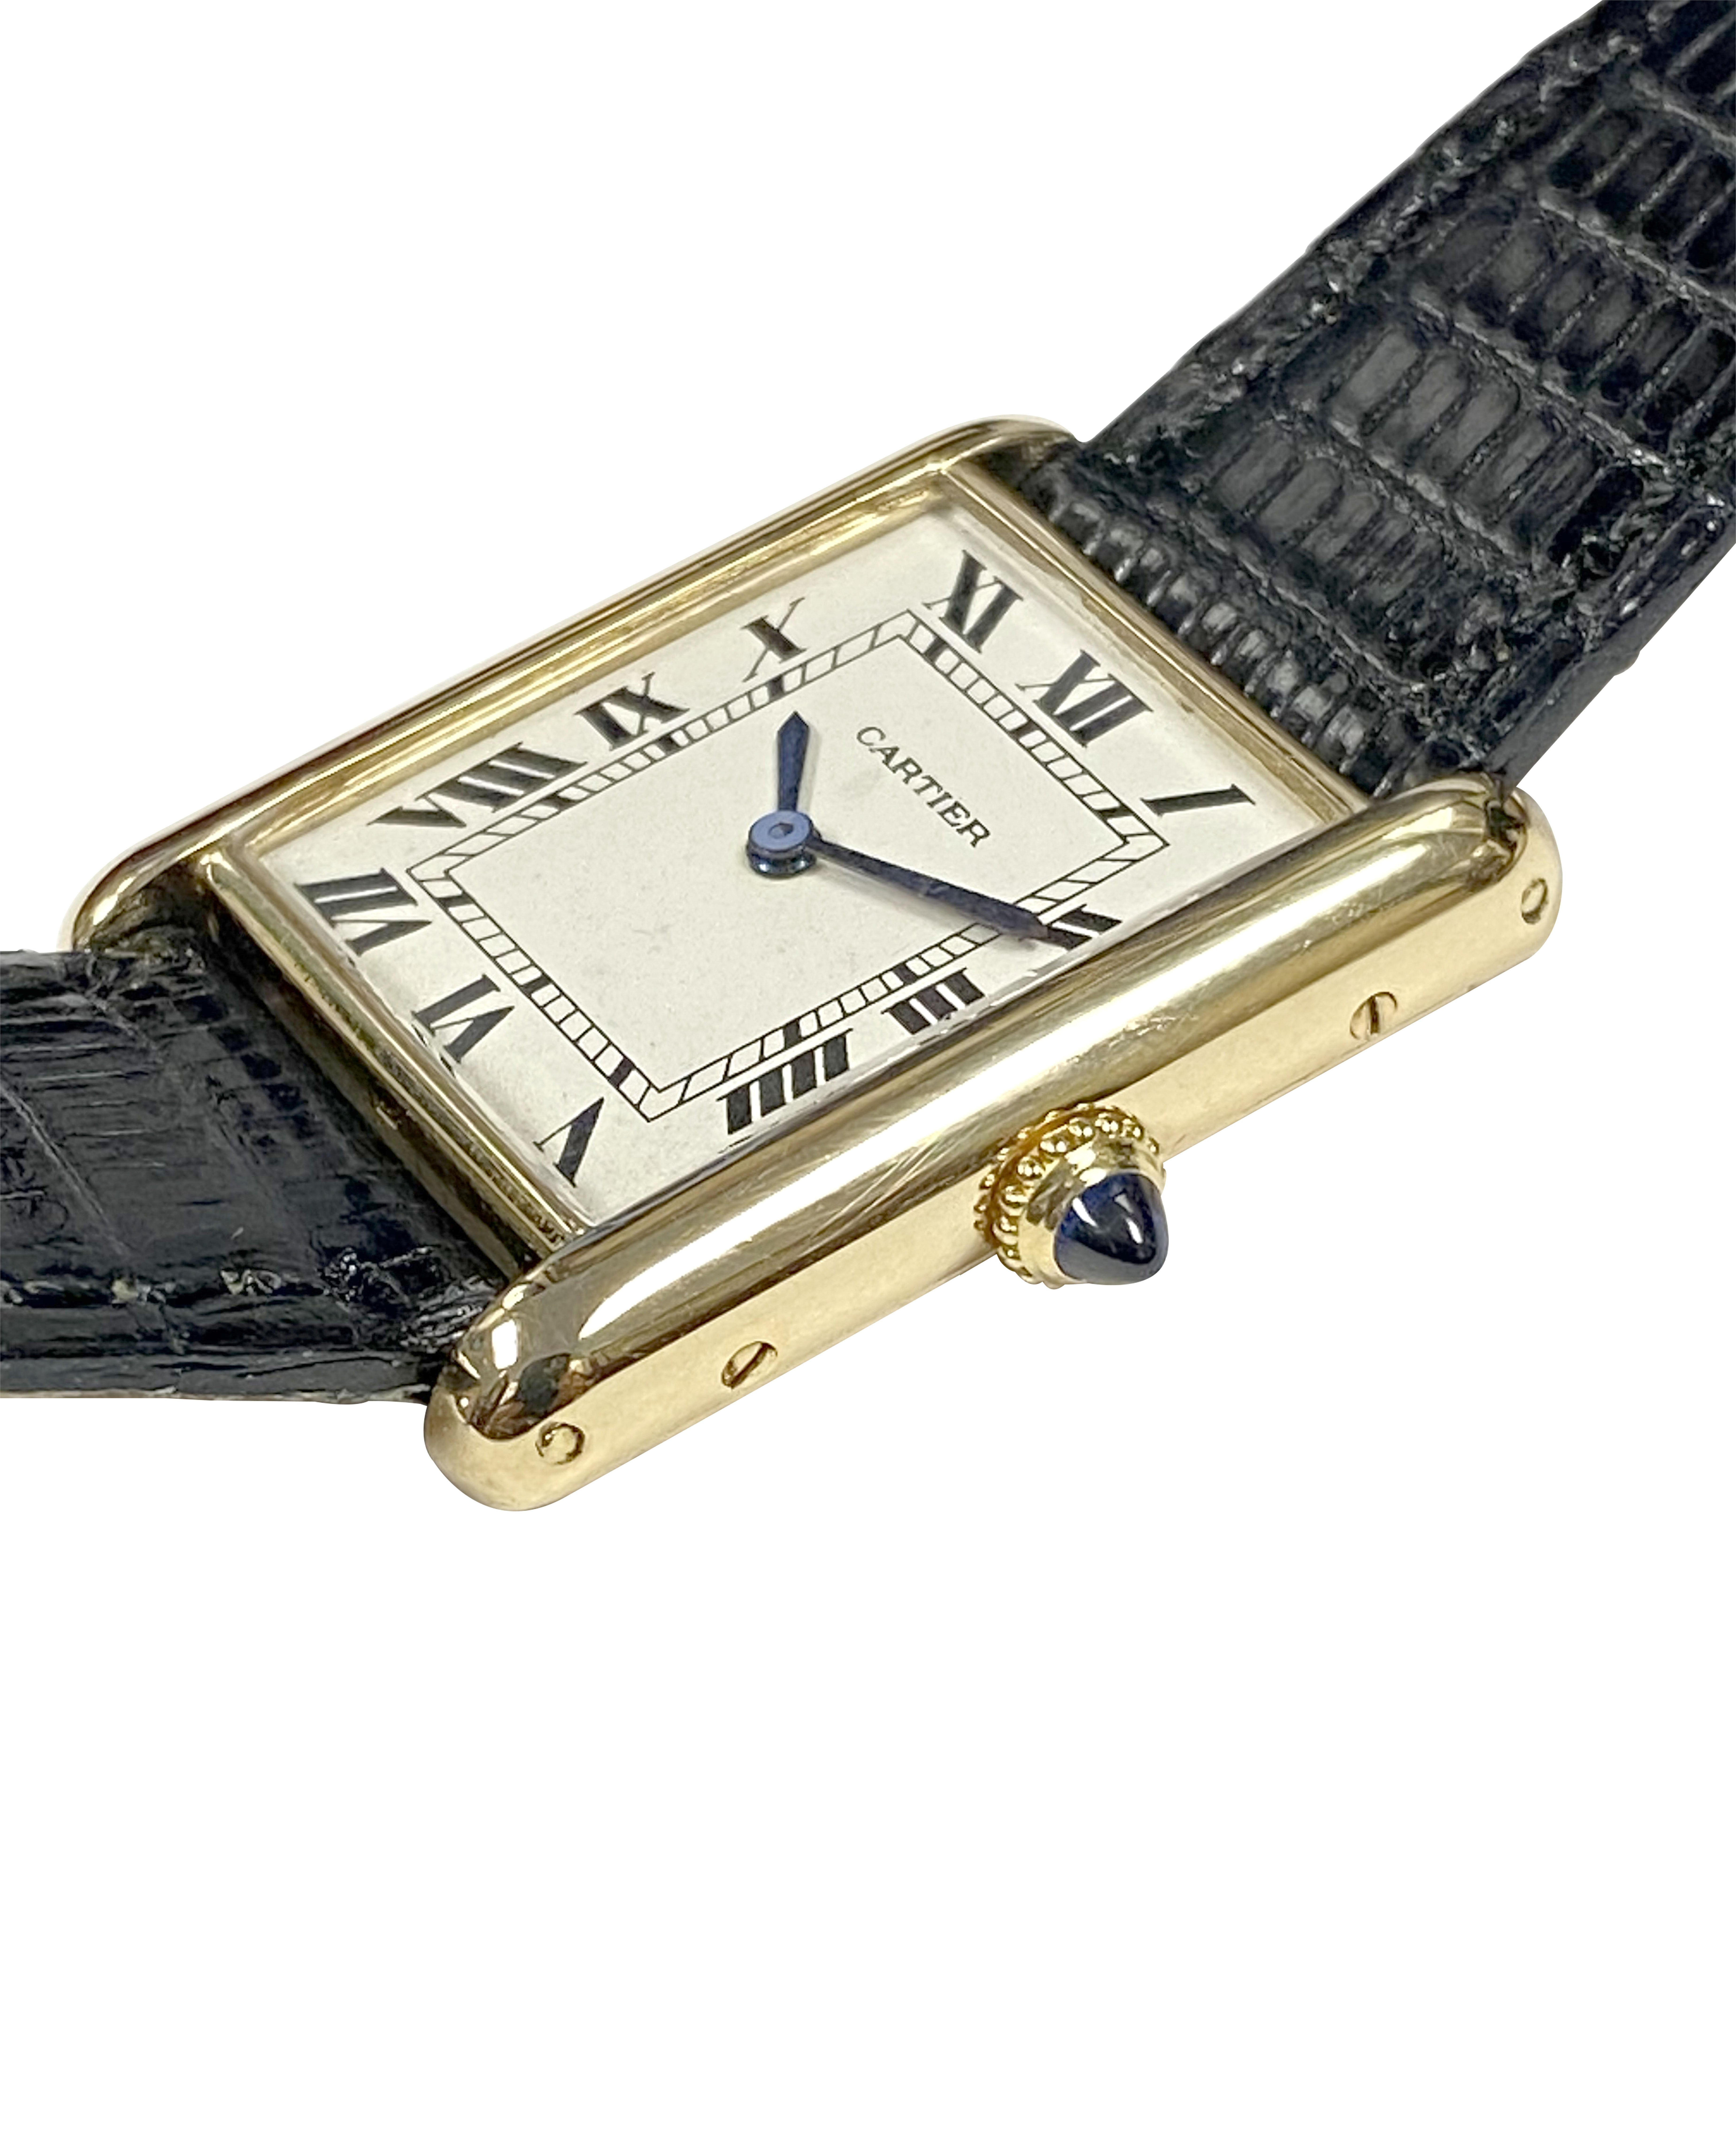 Circa 1970s Cartier Classic Tank Wrist Watch. 18k Yellow Gold 30 X 24 M.M. 2 Piece case, 17 Jewel, mechanical, Manual wind Cartier movement, White Dial with Black Roman Numerals, Sapphire Crown. New Black Lizard strap with Cartier Gold Plate Tang